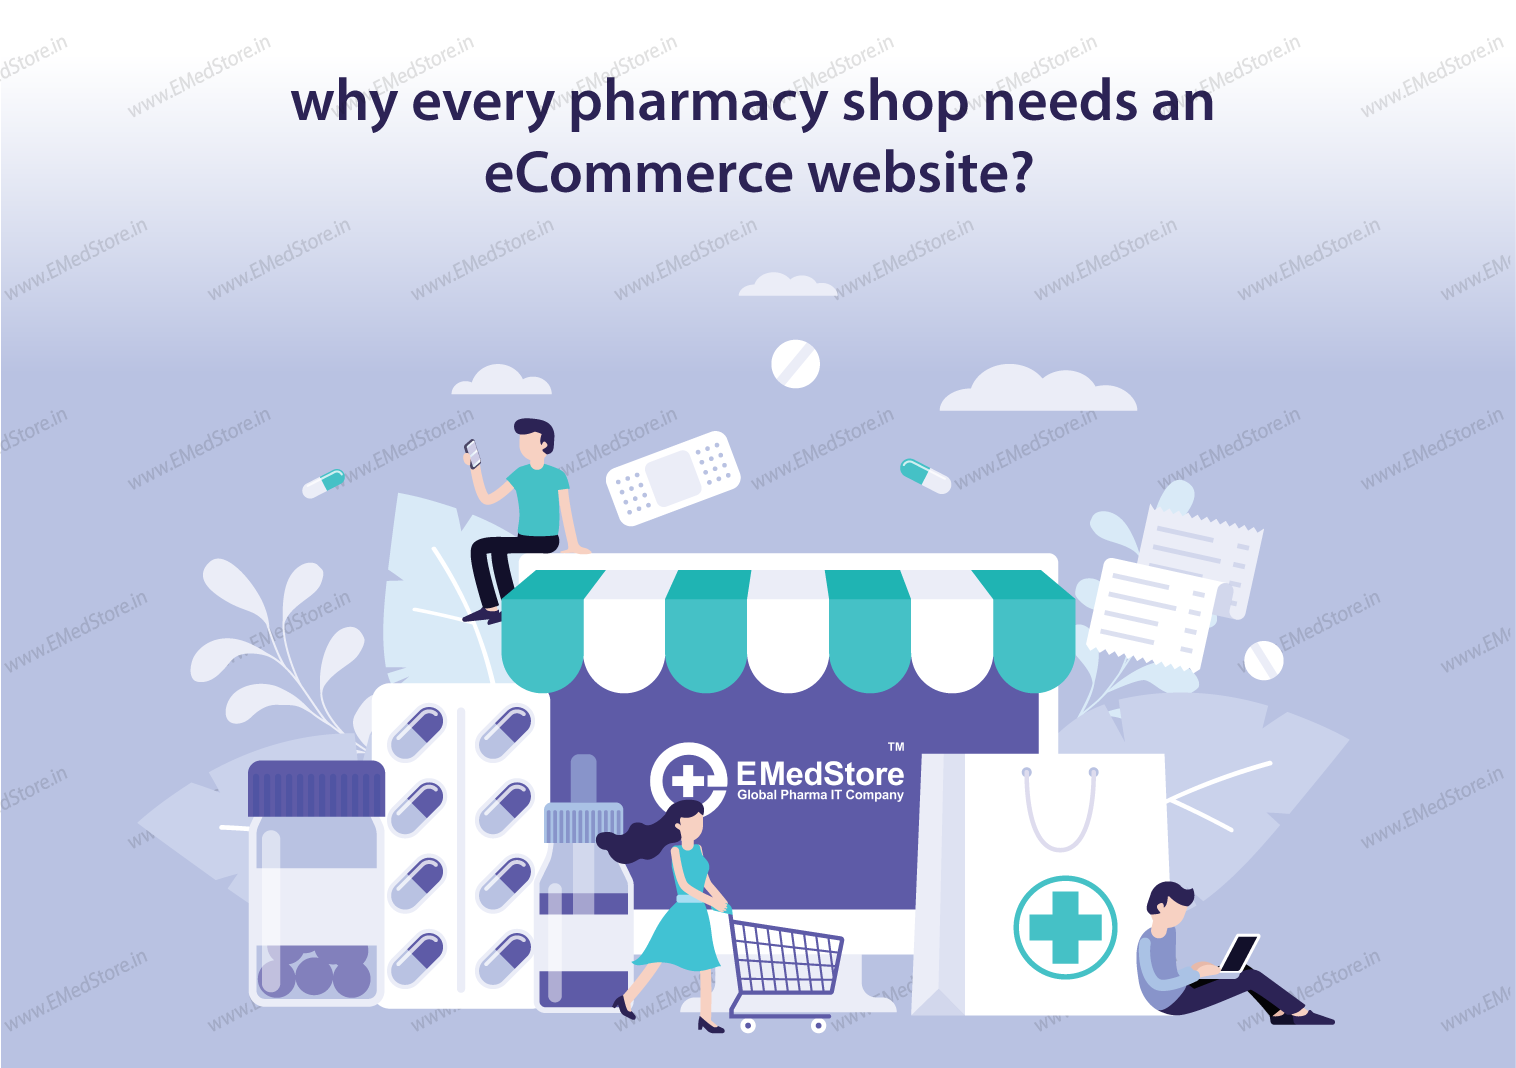 which are the good companies to design ecommerce websites and mobile applications for pharmacy shops